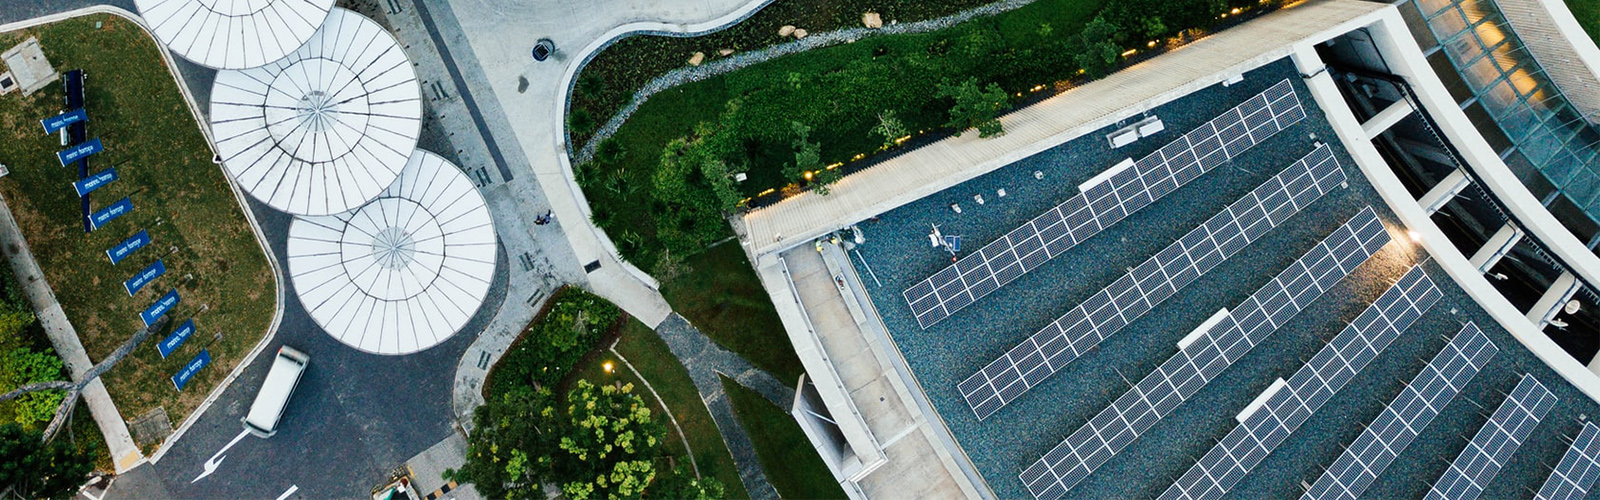 Aerial view of solar panels on top of a building and round white discs on a road.